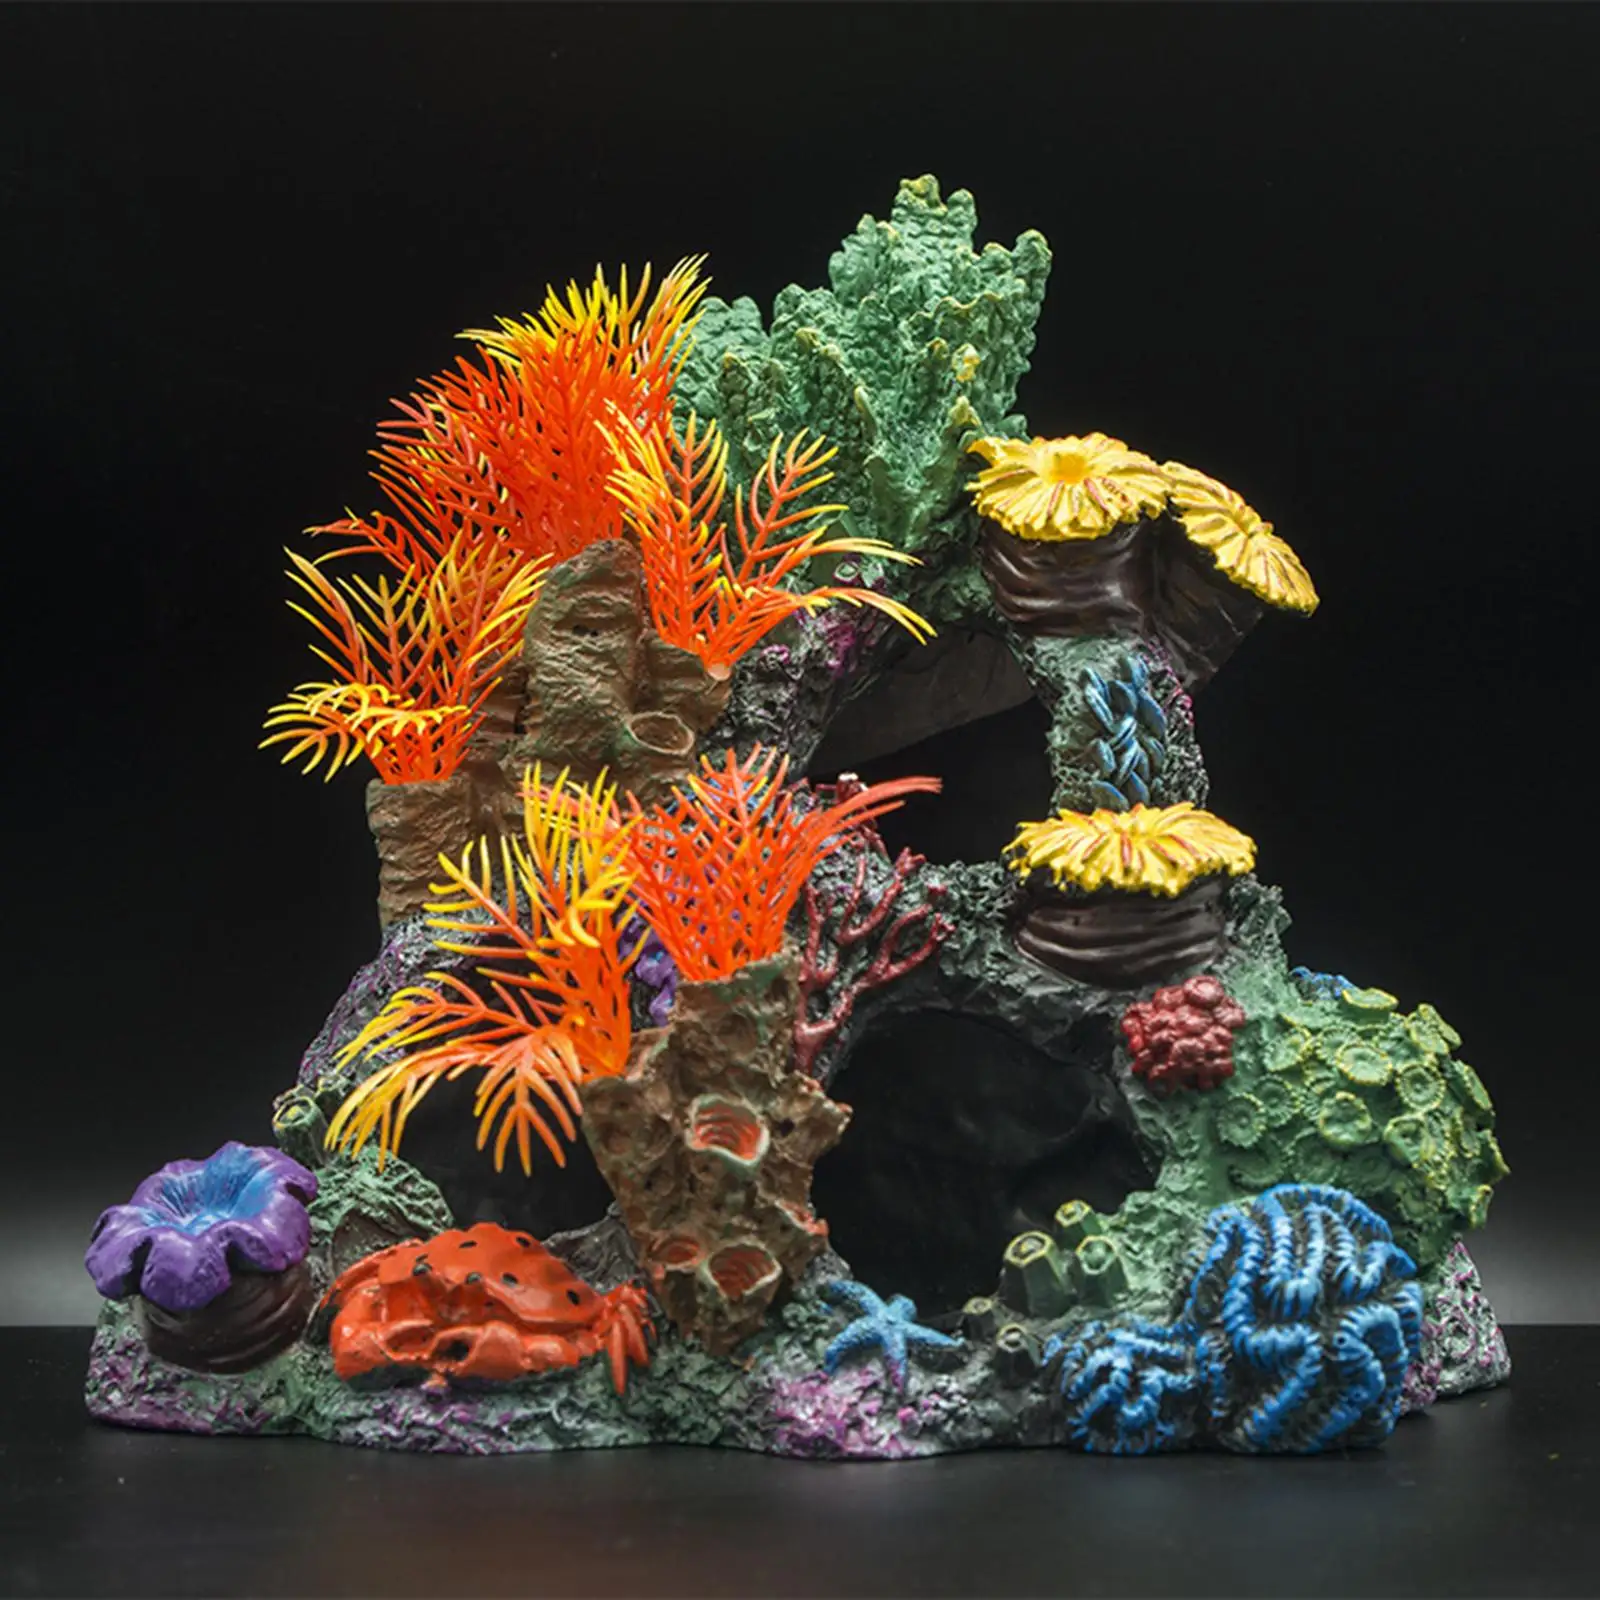 Artificial Coral Simulation Home Furnishings Plants Supplies Resin Aquarium Coral Decor Saltwater Fish Tank Landscaping